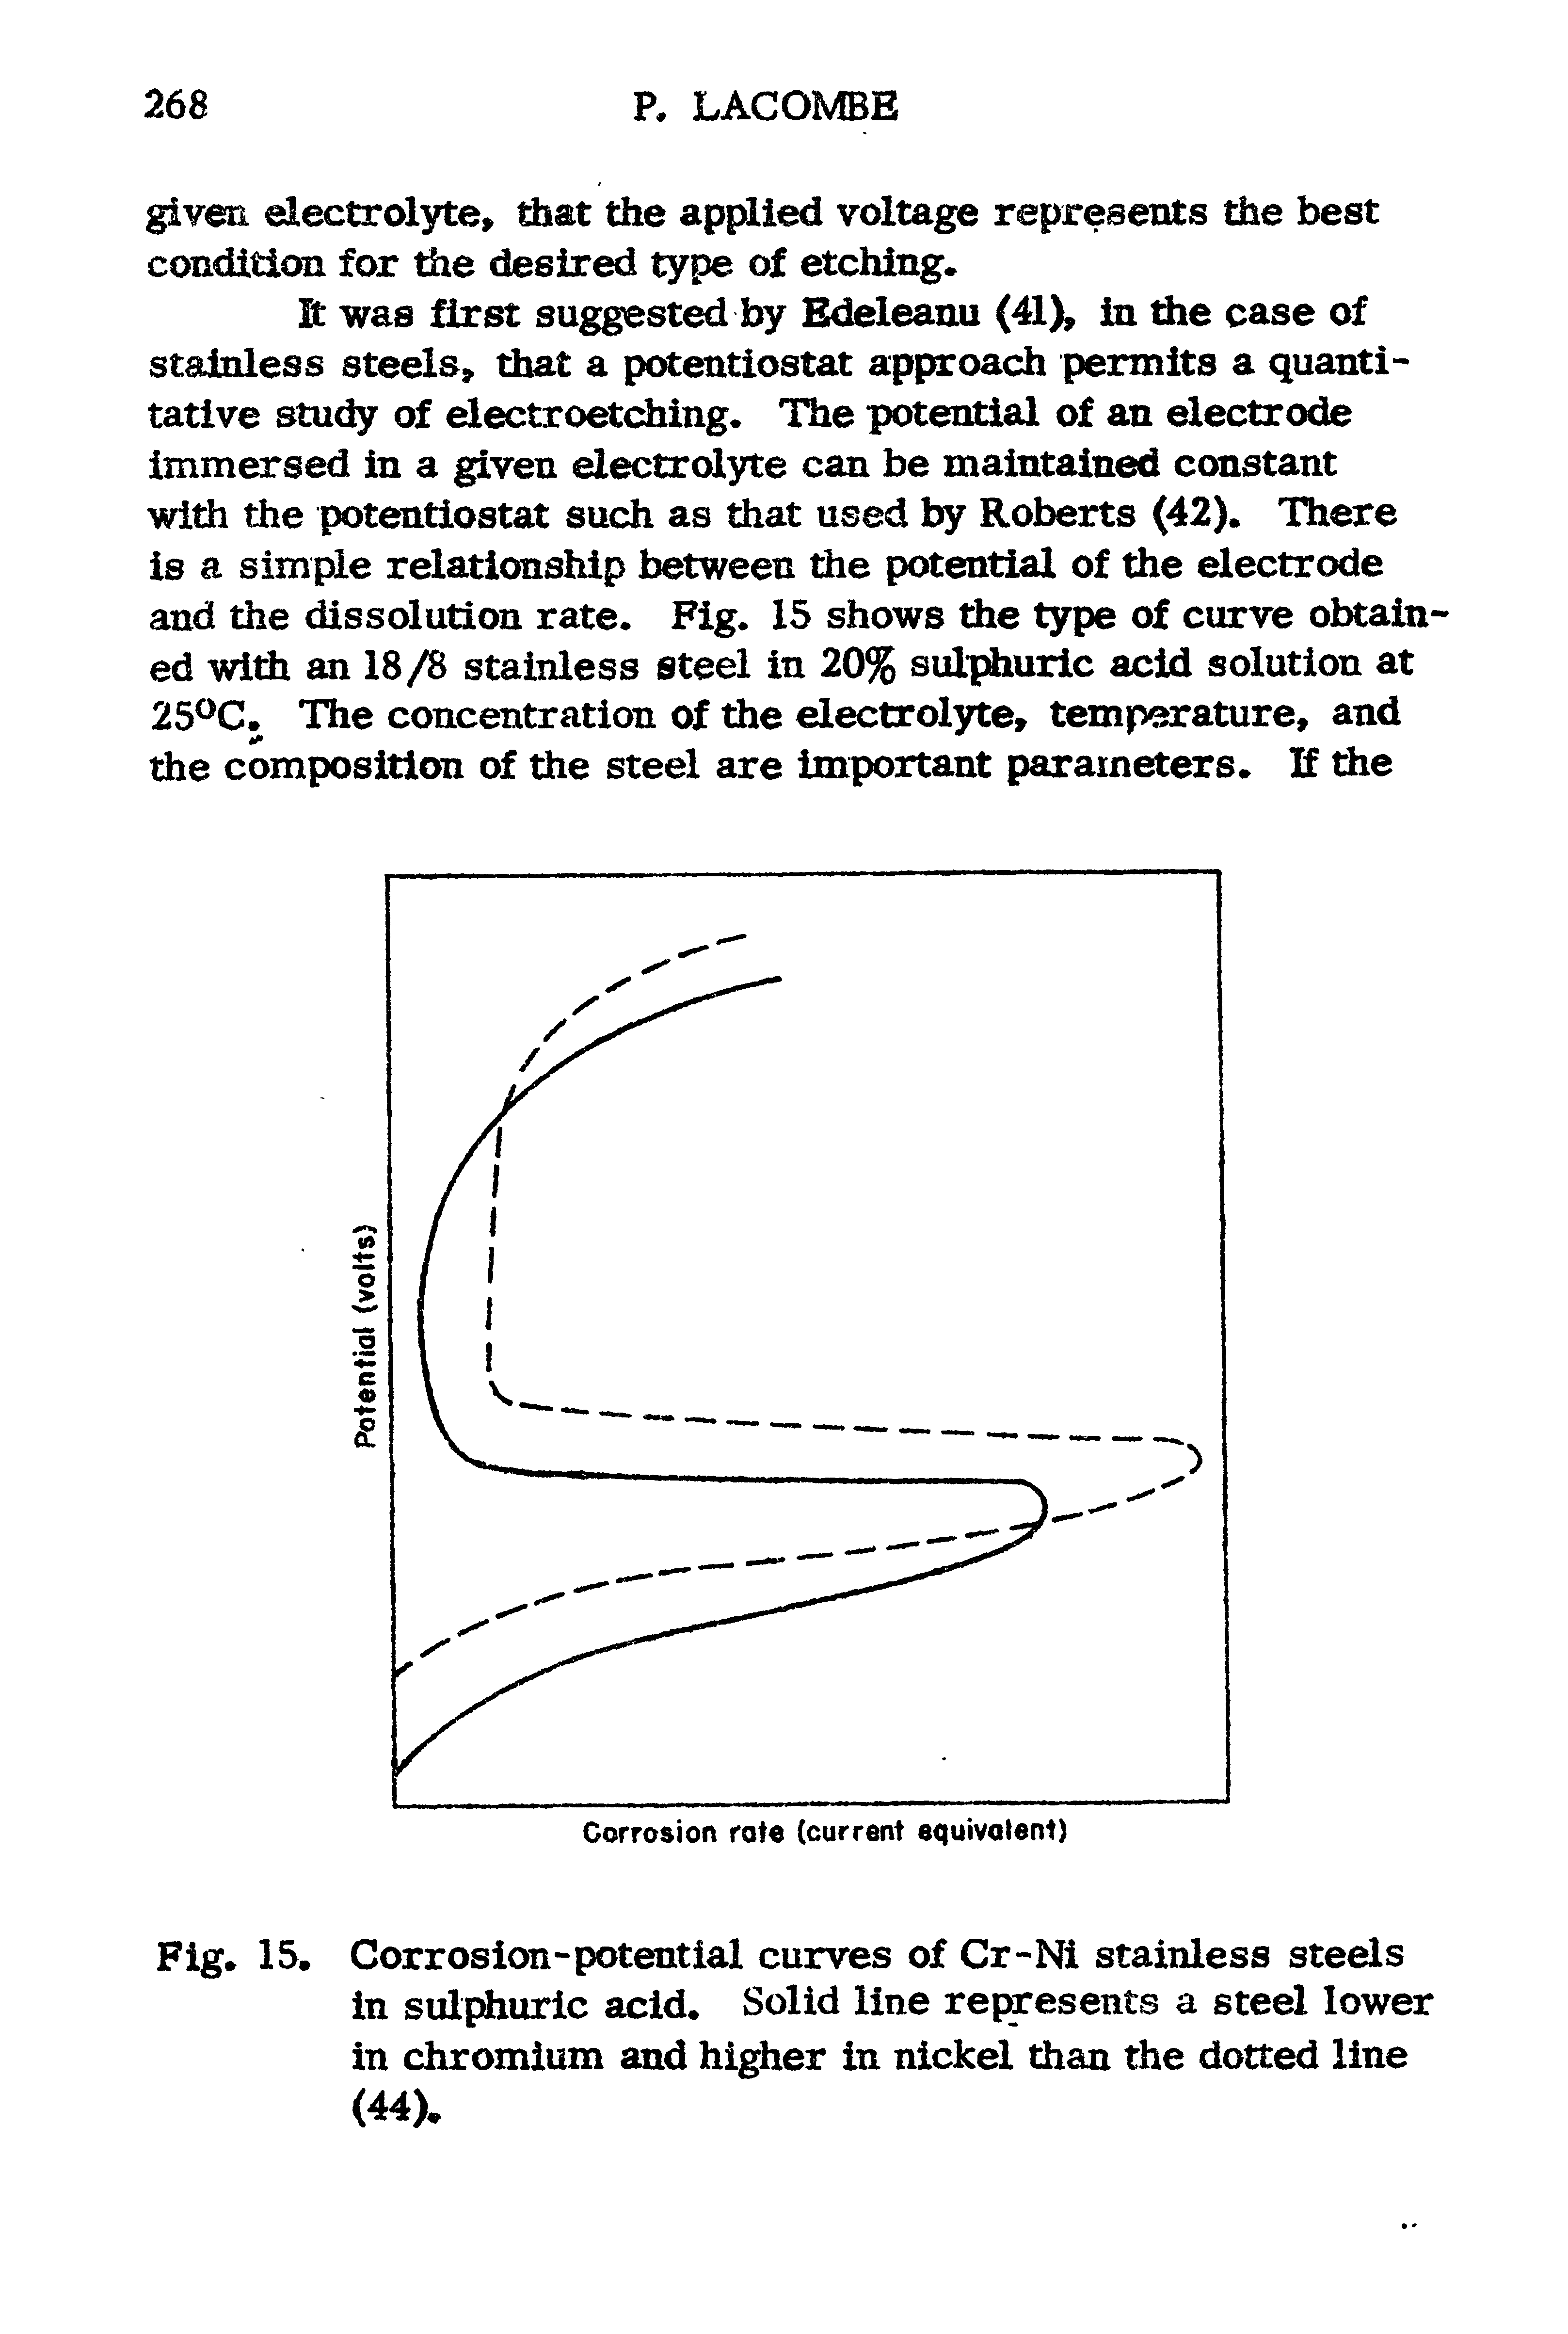 Fig. 15. Corrosion-potential curves of Cr-Ni stainless steels in sulphuric acid. Solid line represents a steel lower in chromium and higher in nickel than the dotted line (44).